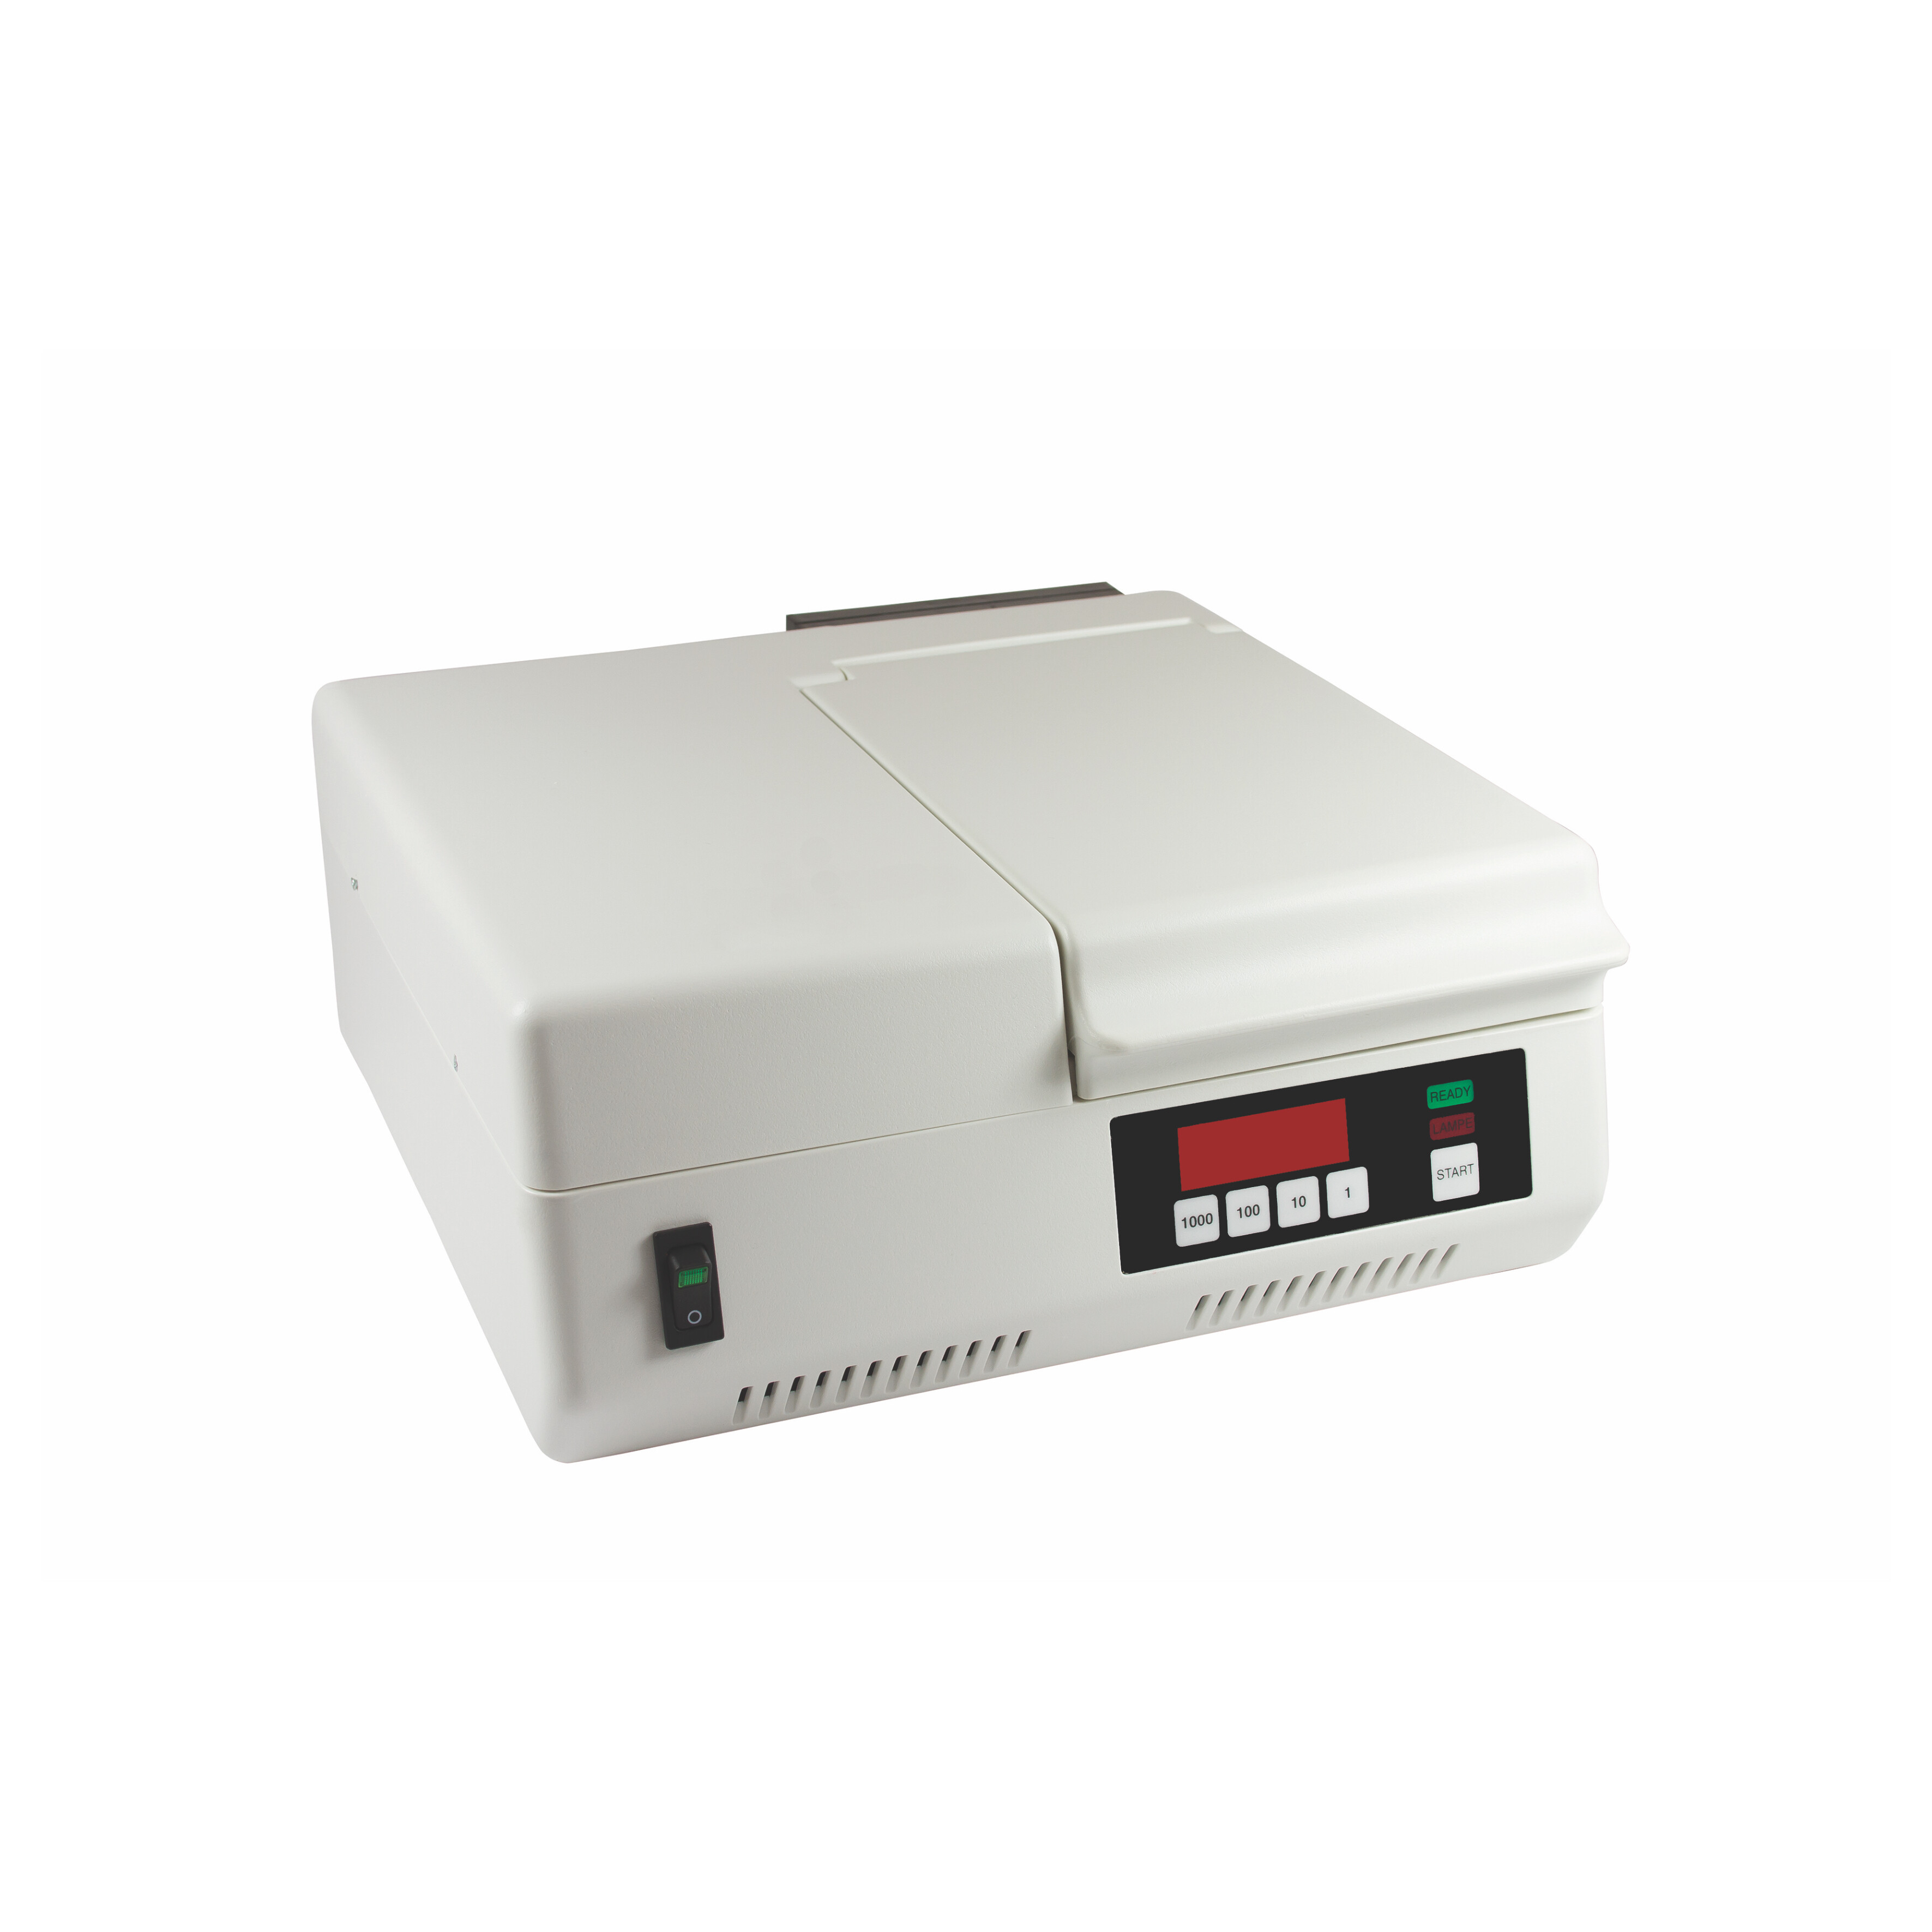 3D Uv-Led Curing Unit For Producing And Maintain